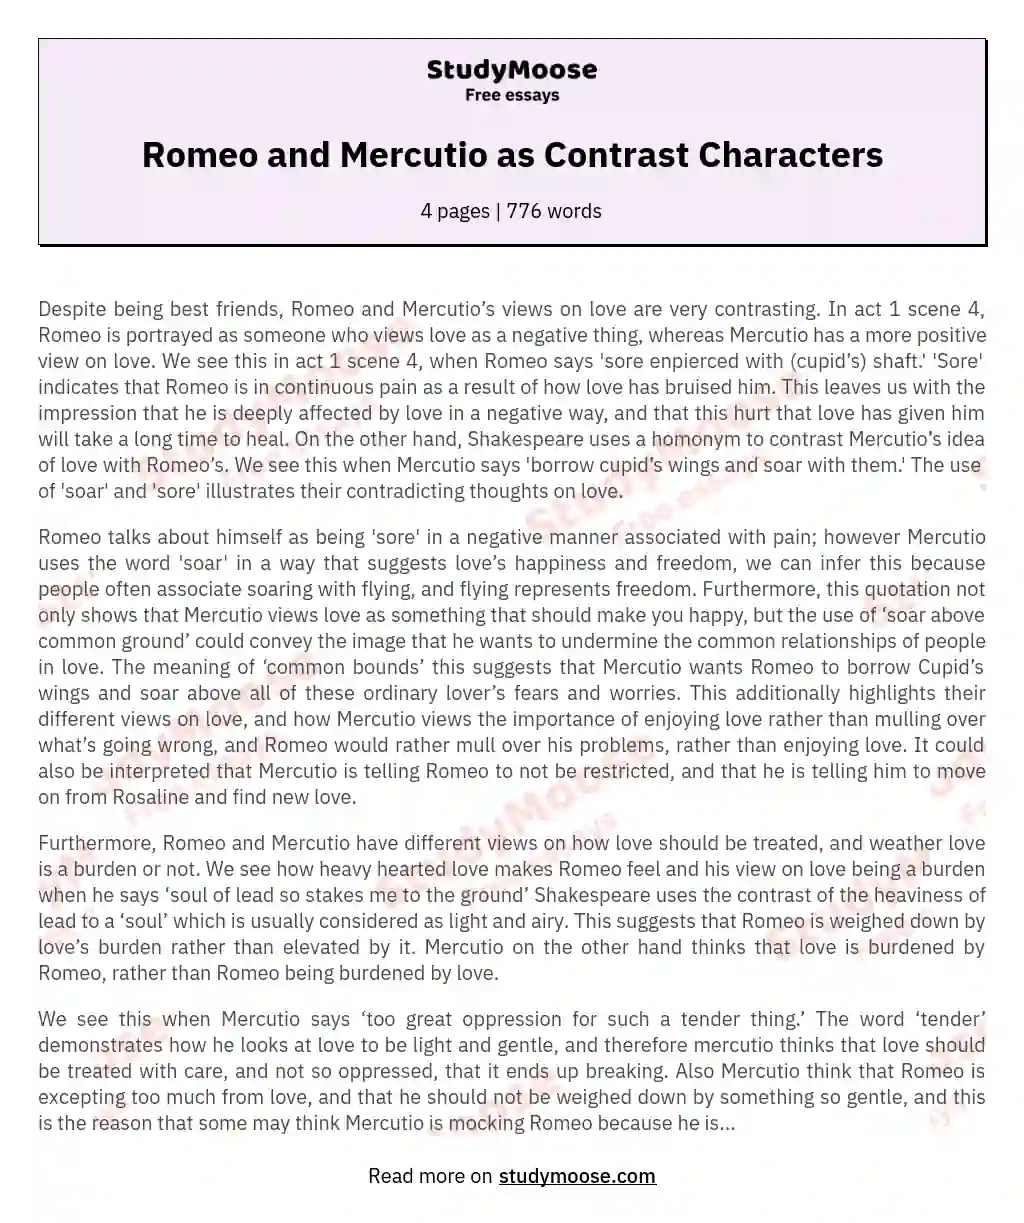 Contrasting Views on Love and Dreams in "Romeo and Juliet" essay